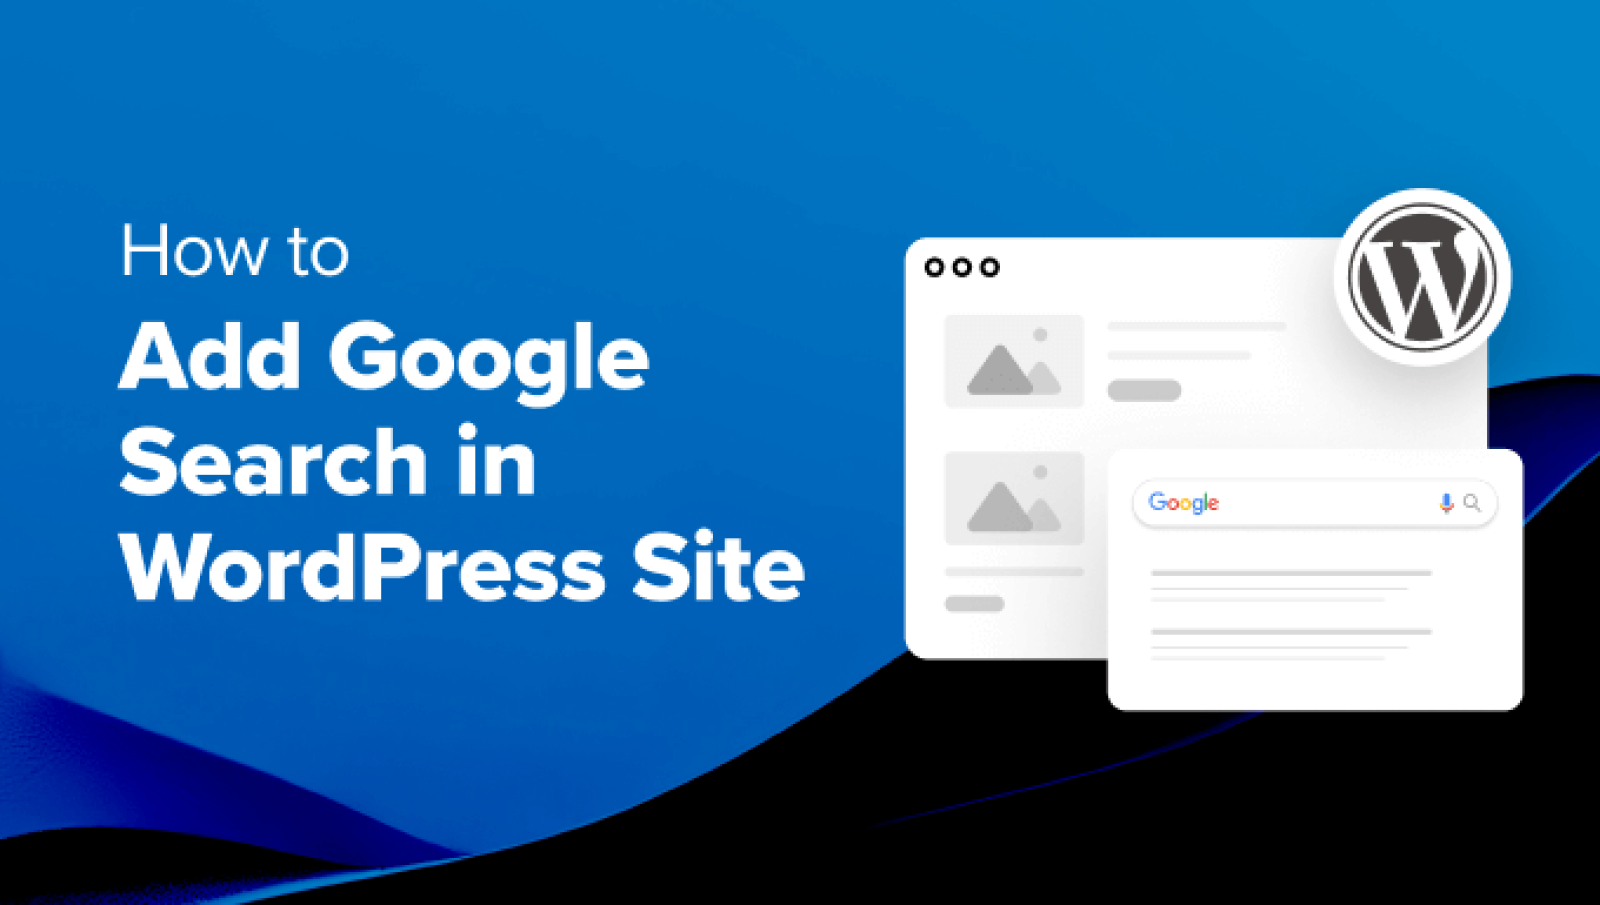 Find out how to Add Google Search in a WordPress Website (The Simple Manner)